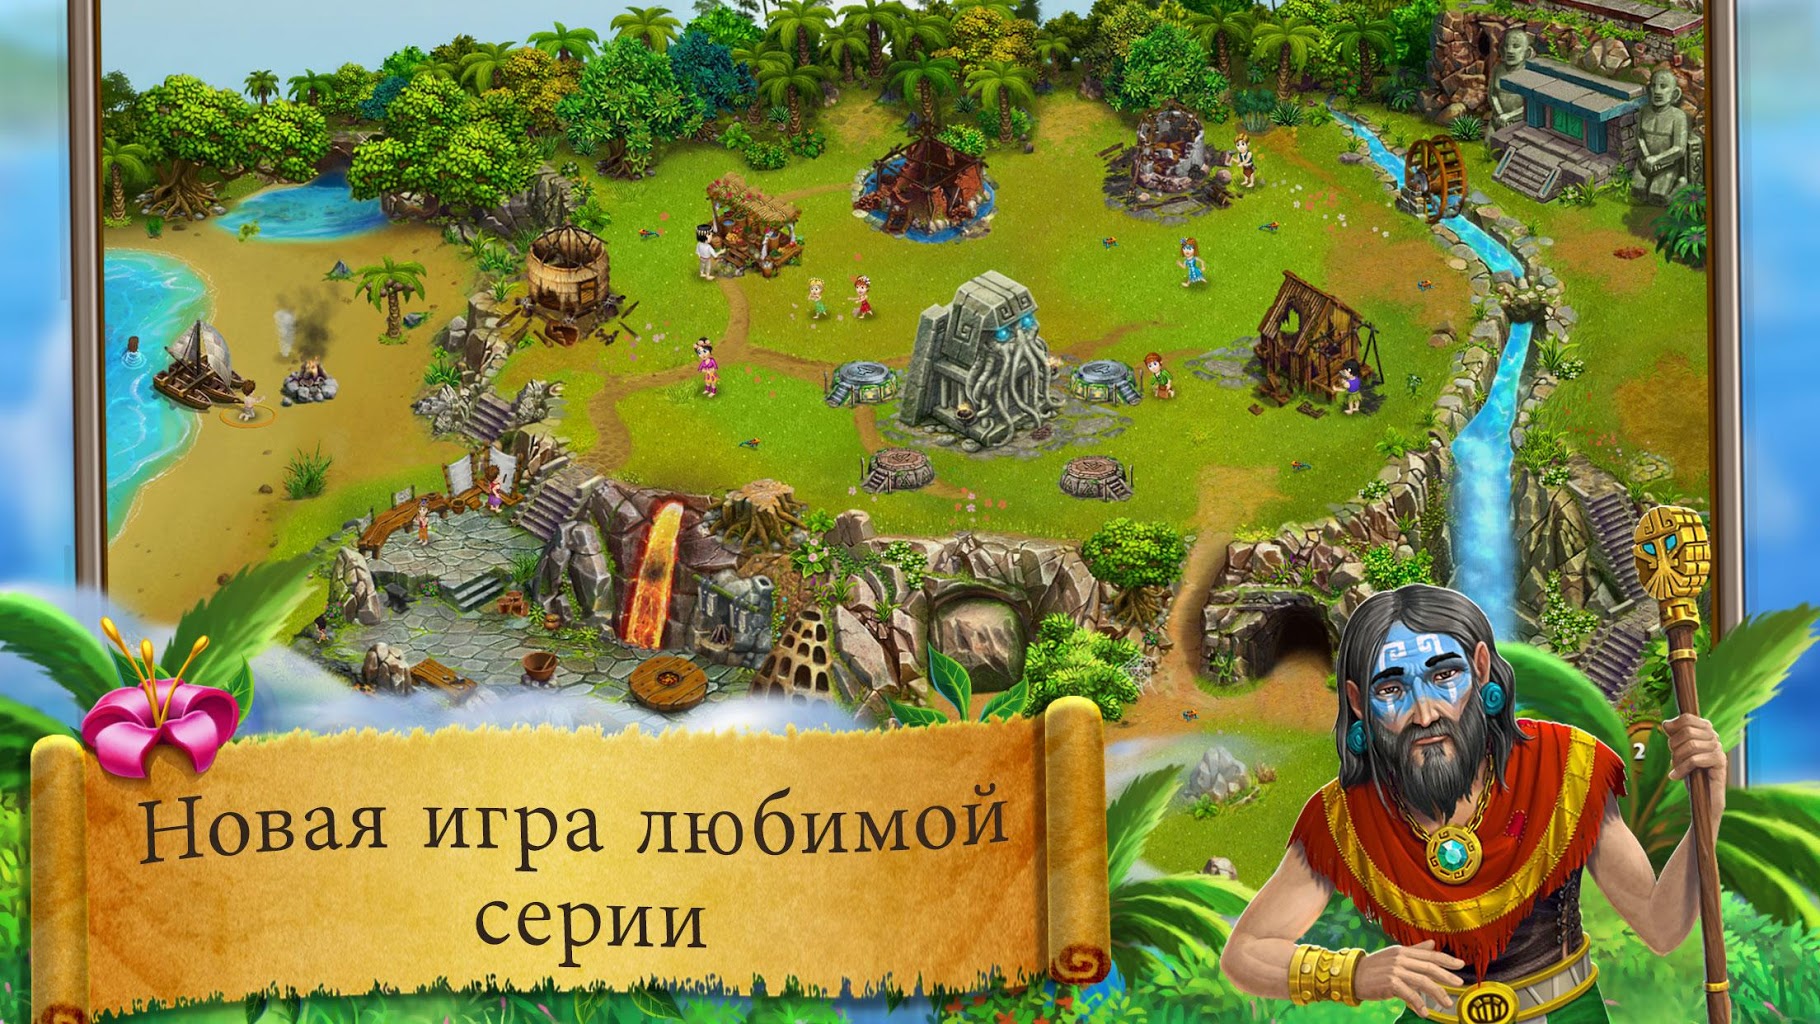 virtual villagers 5 download for android